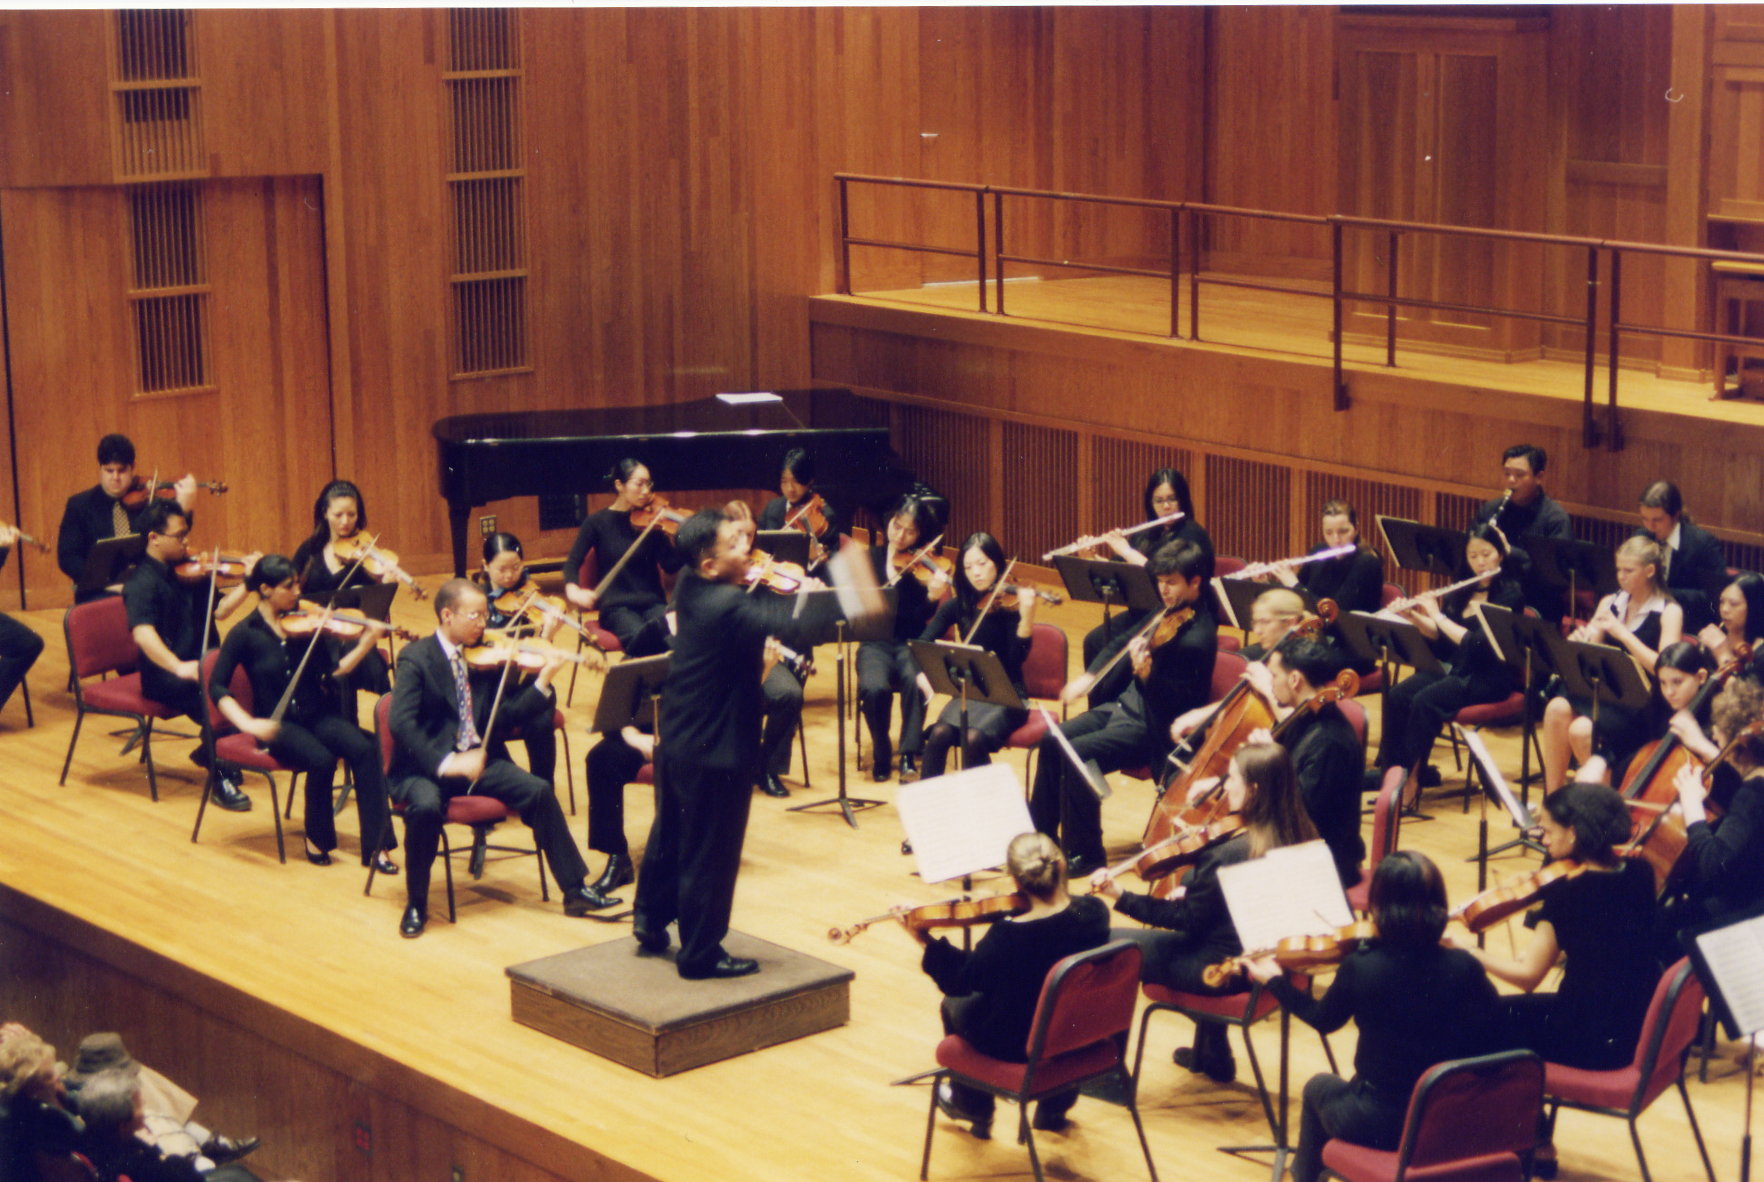 Dong-hyun Kim, seen here conducting a Nova Philharmonic performance, is forming a new orchestra, the Flushing-based Queensboro Symphony Orchestra.